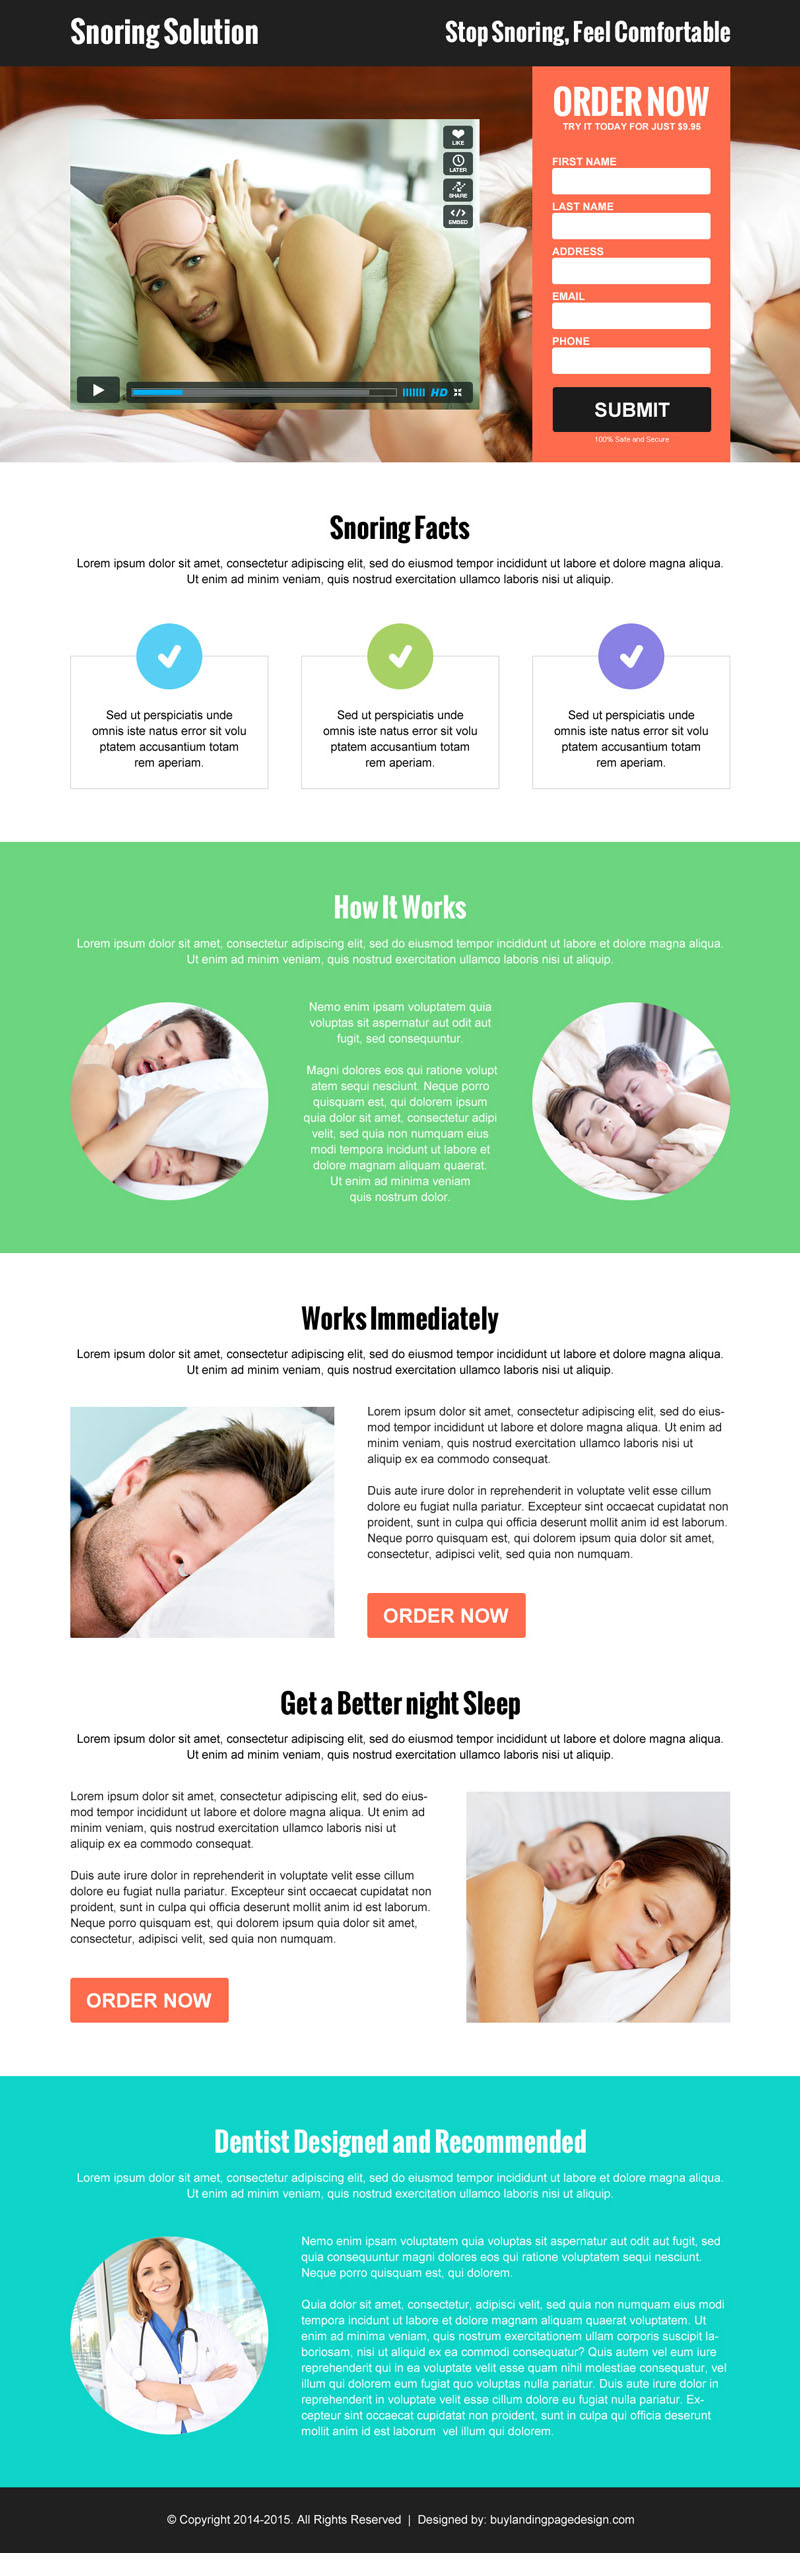 anti snoring video lead capture converting landing page template to increase conversion, leads and sales of your biz https://www.buylandingpagedesign.com/buy/anti-snoring-video-lead-capture-converting-landing-page/1437